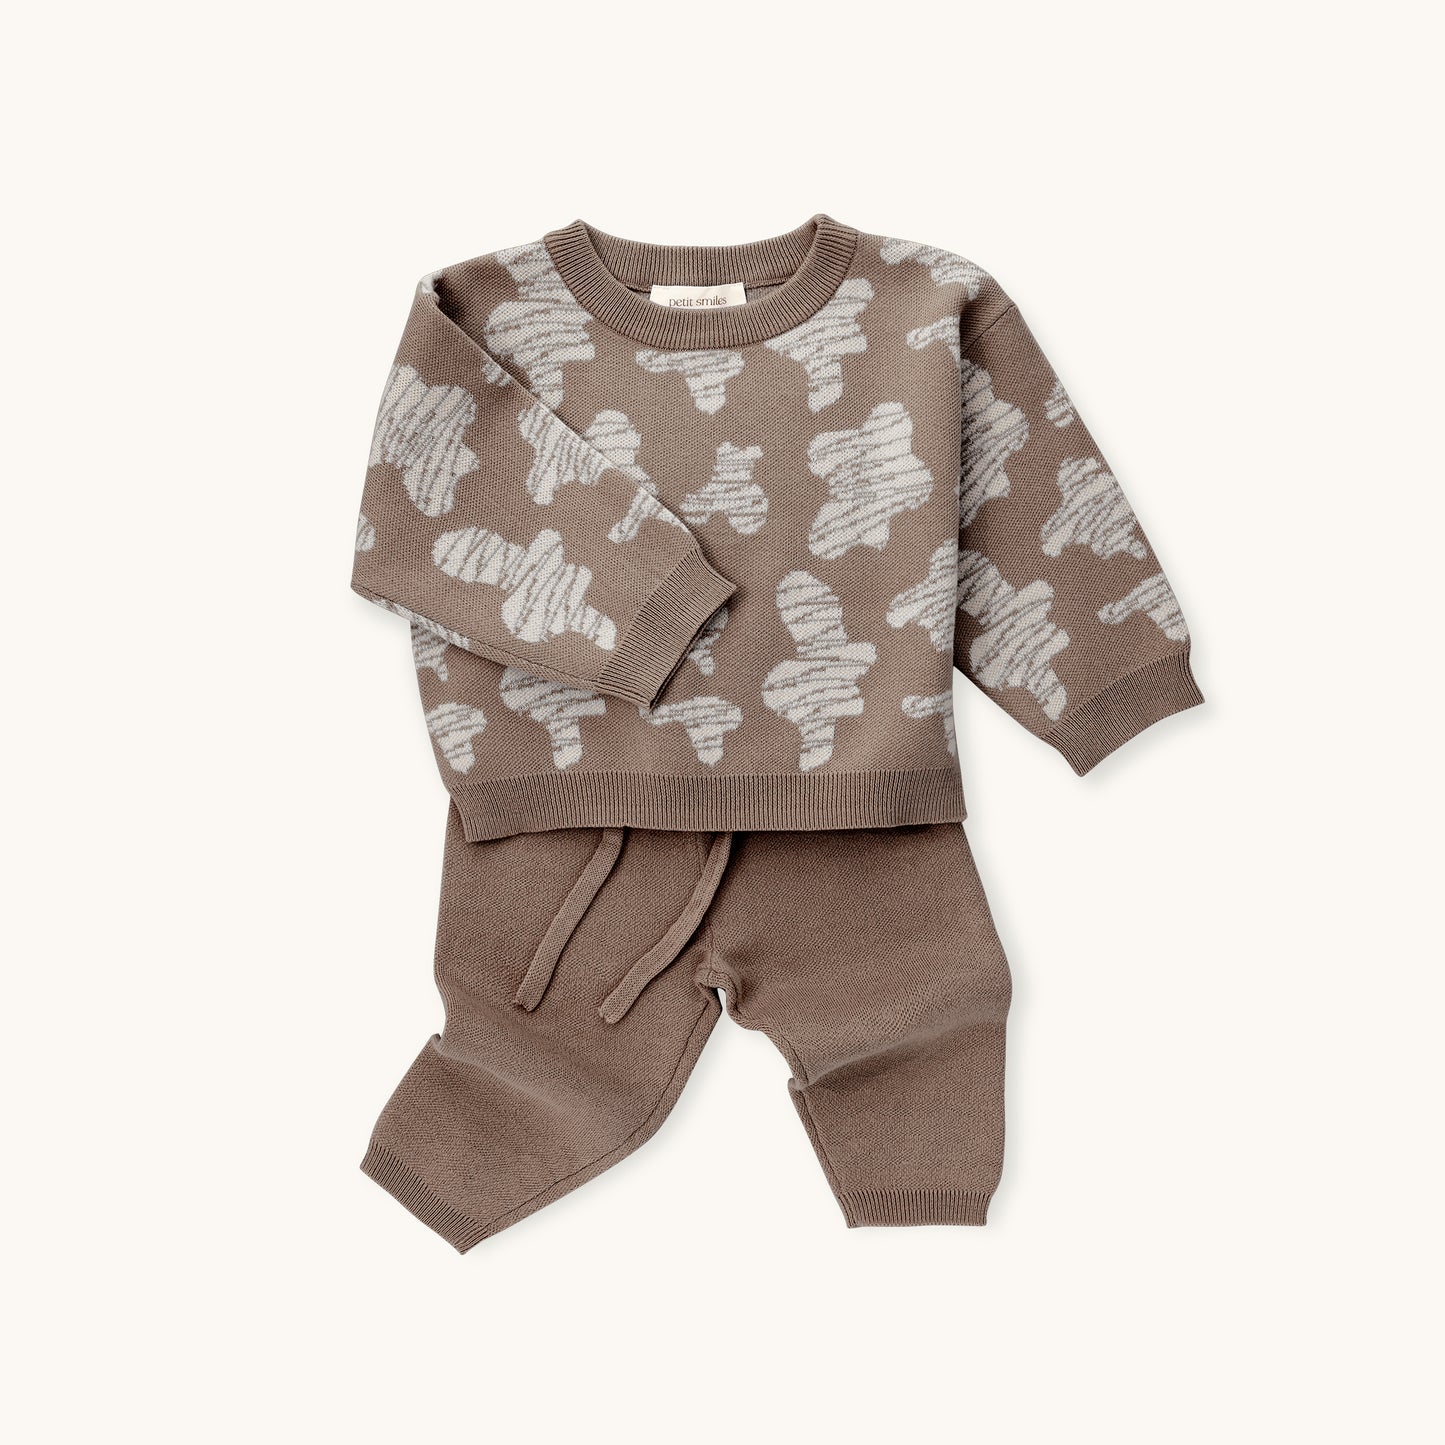 KNITTED SPOTS PULL OVER - CHOCO; 100% Organic Cotton; Jacquard Pull Over made from GOTS-certified organic cotton; 'Choco Spots' Jacquard pattern; Rib finish at neck, cuffs and hem; Dropped shoulder; Relaxed fit. 